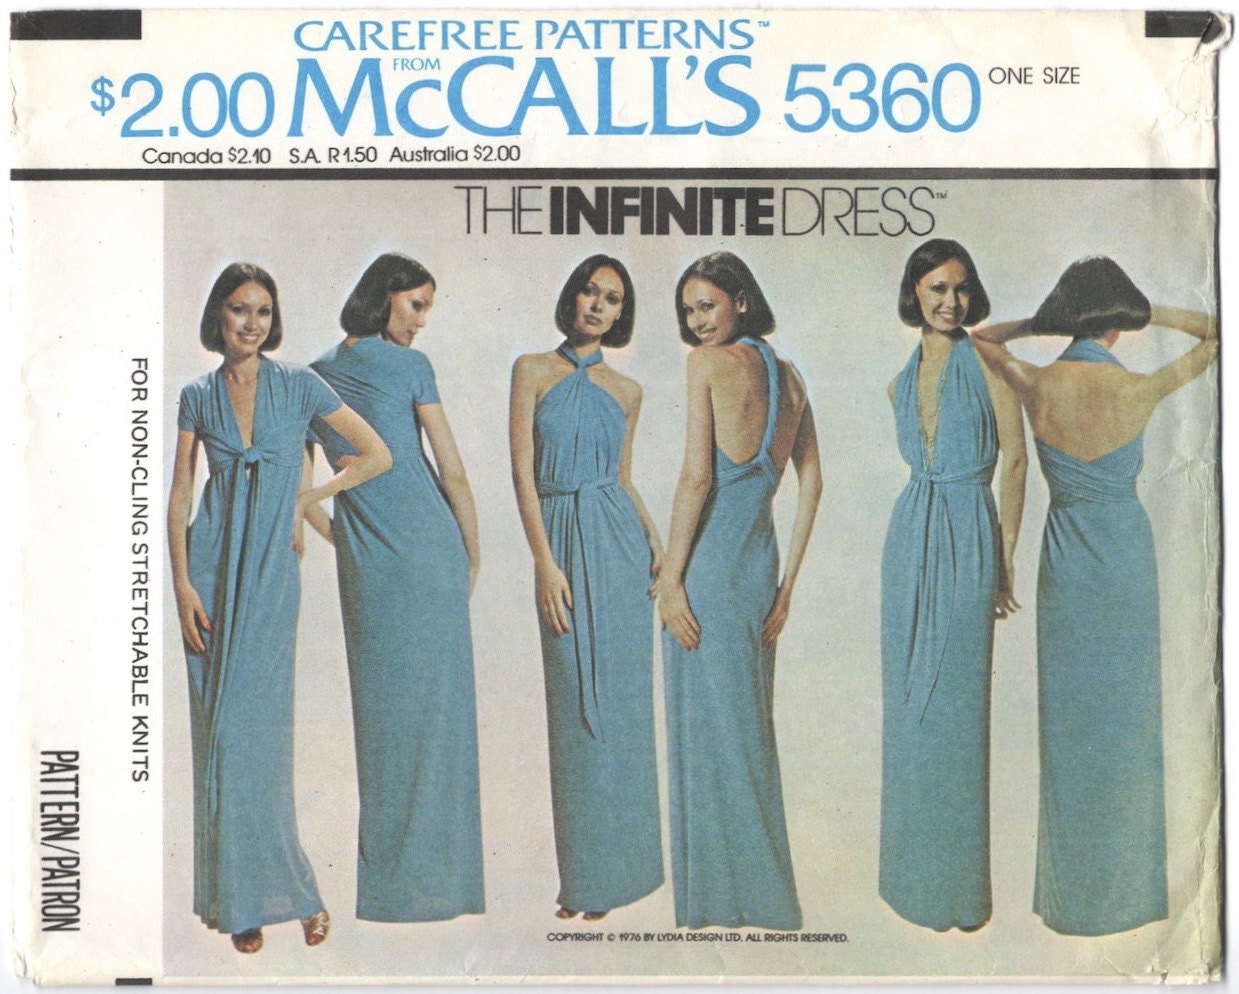 McCall's 5360 by Lydia Silvestry (1976)